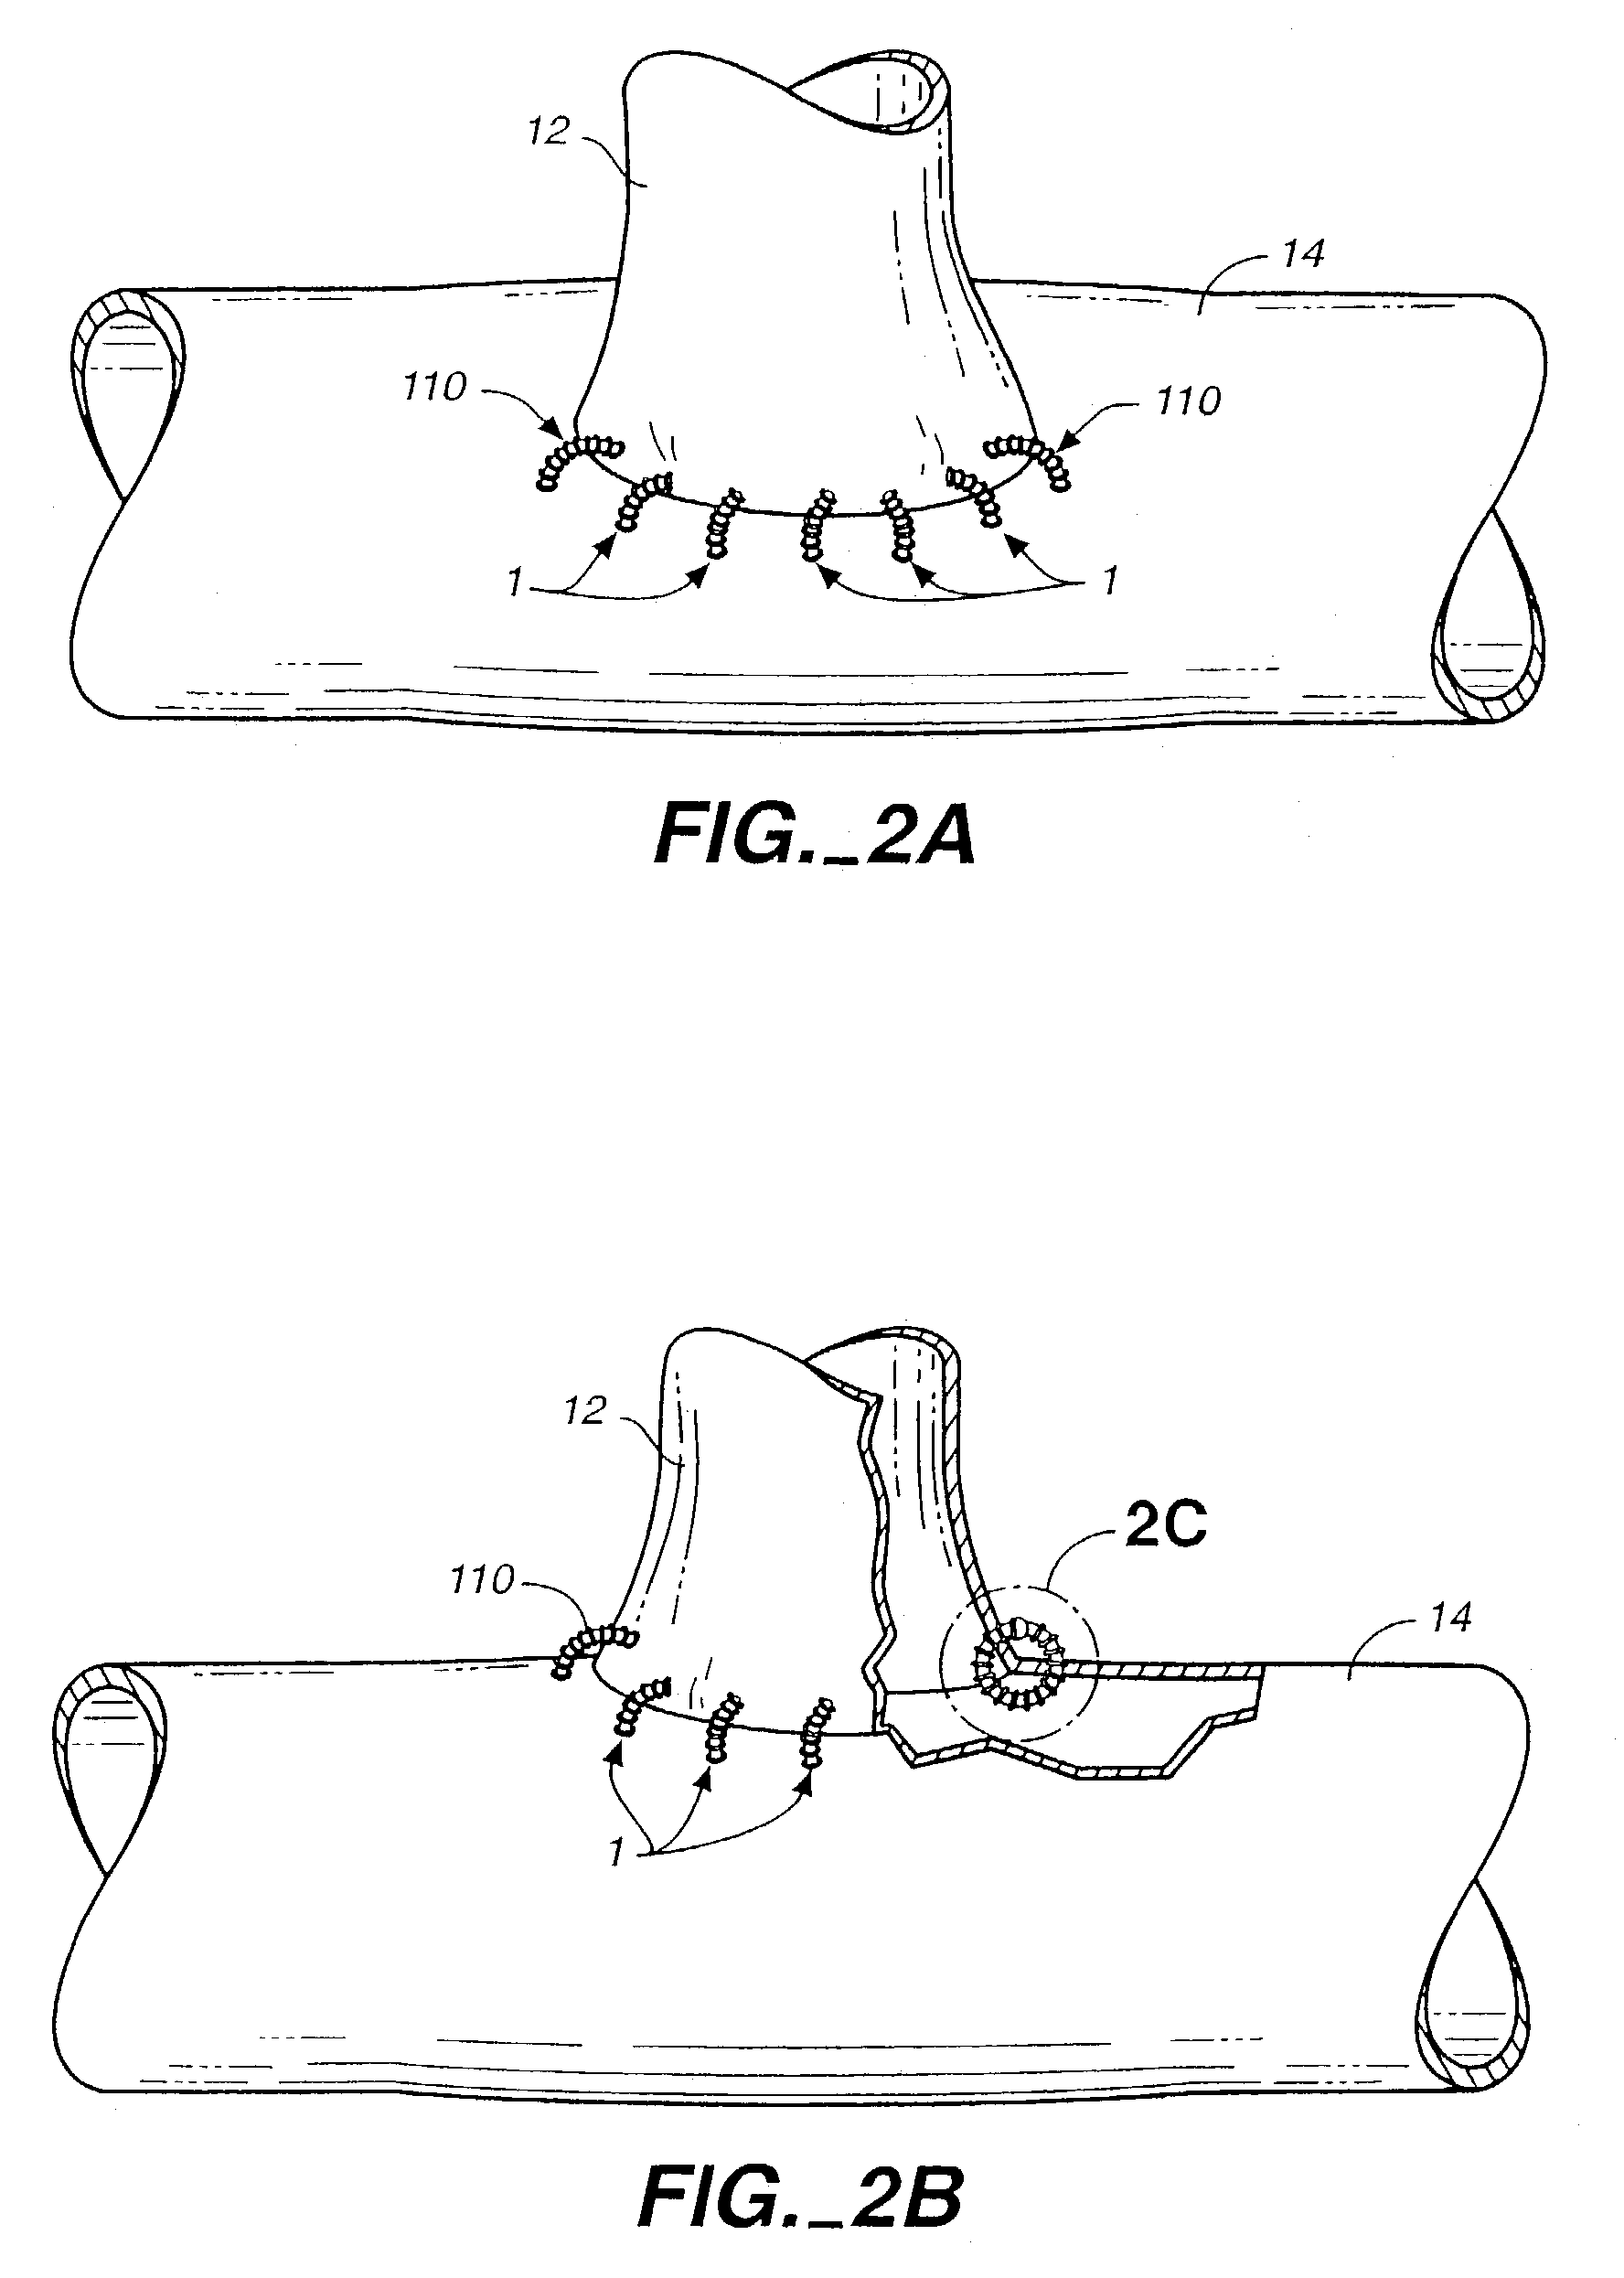 Tissue connector apparatus and methods